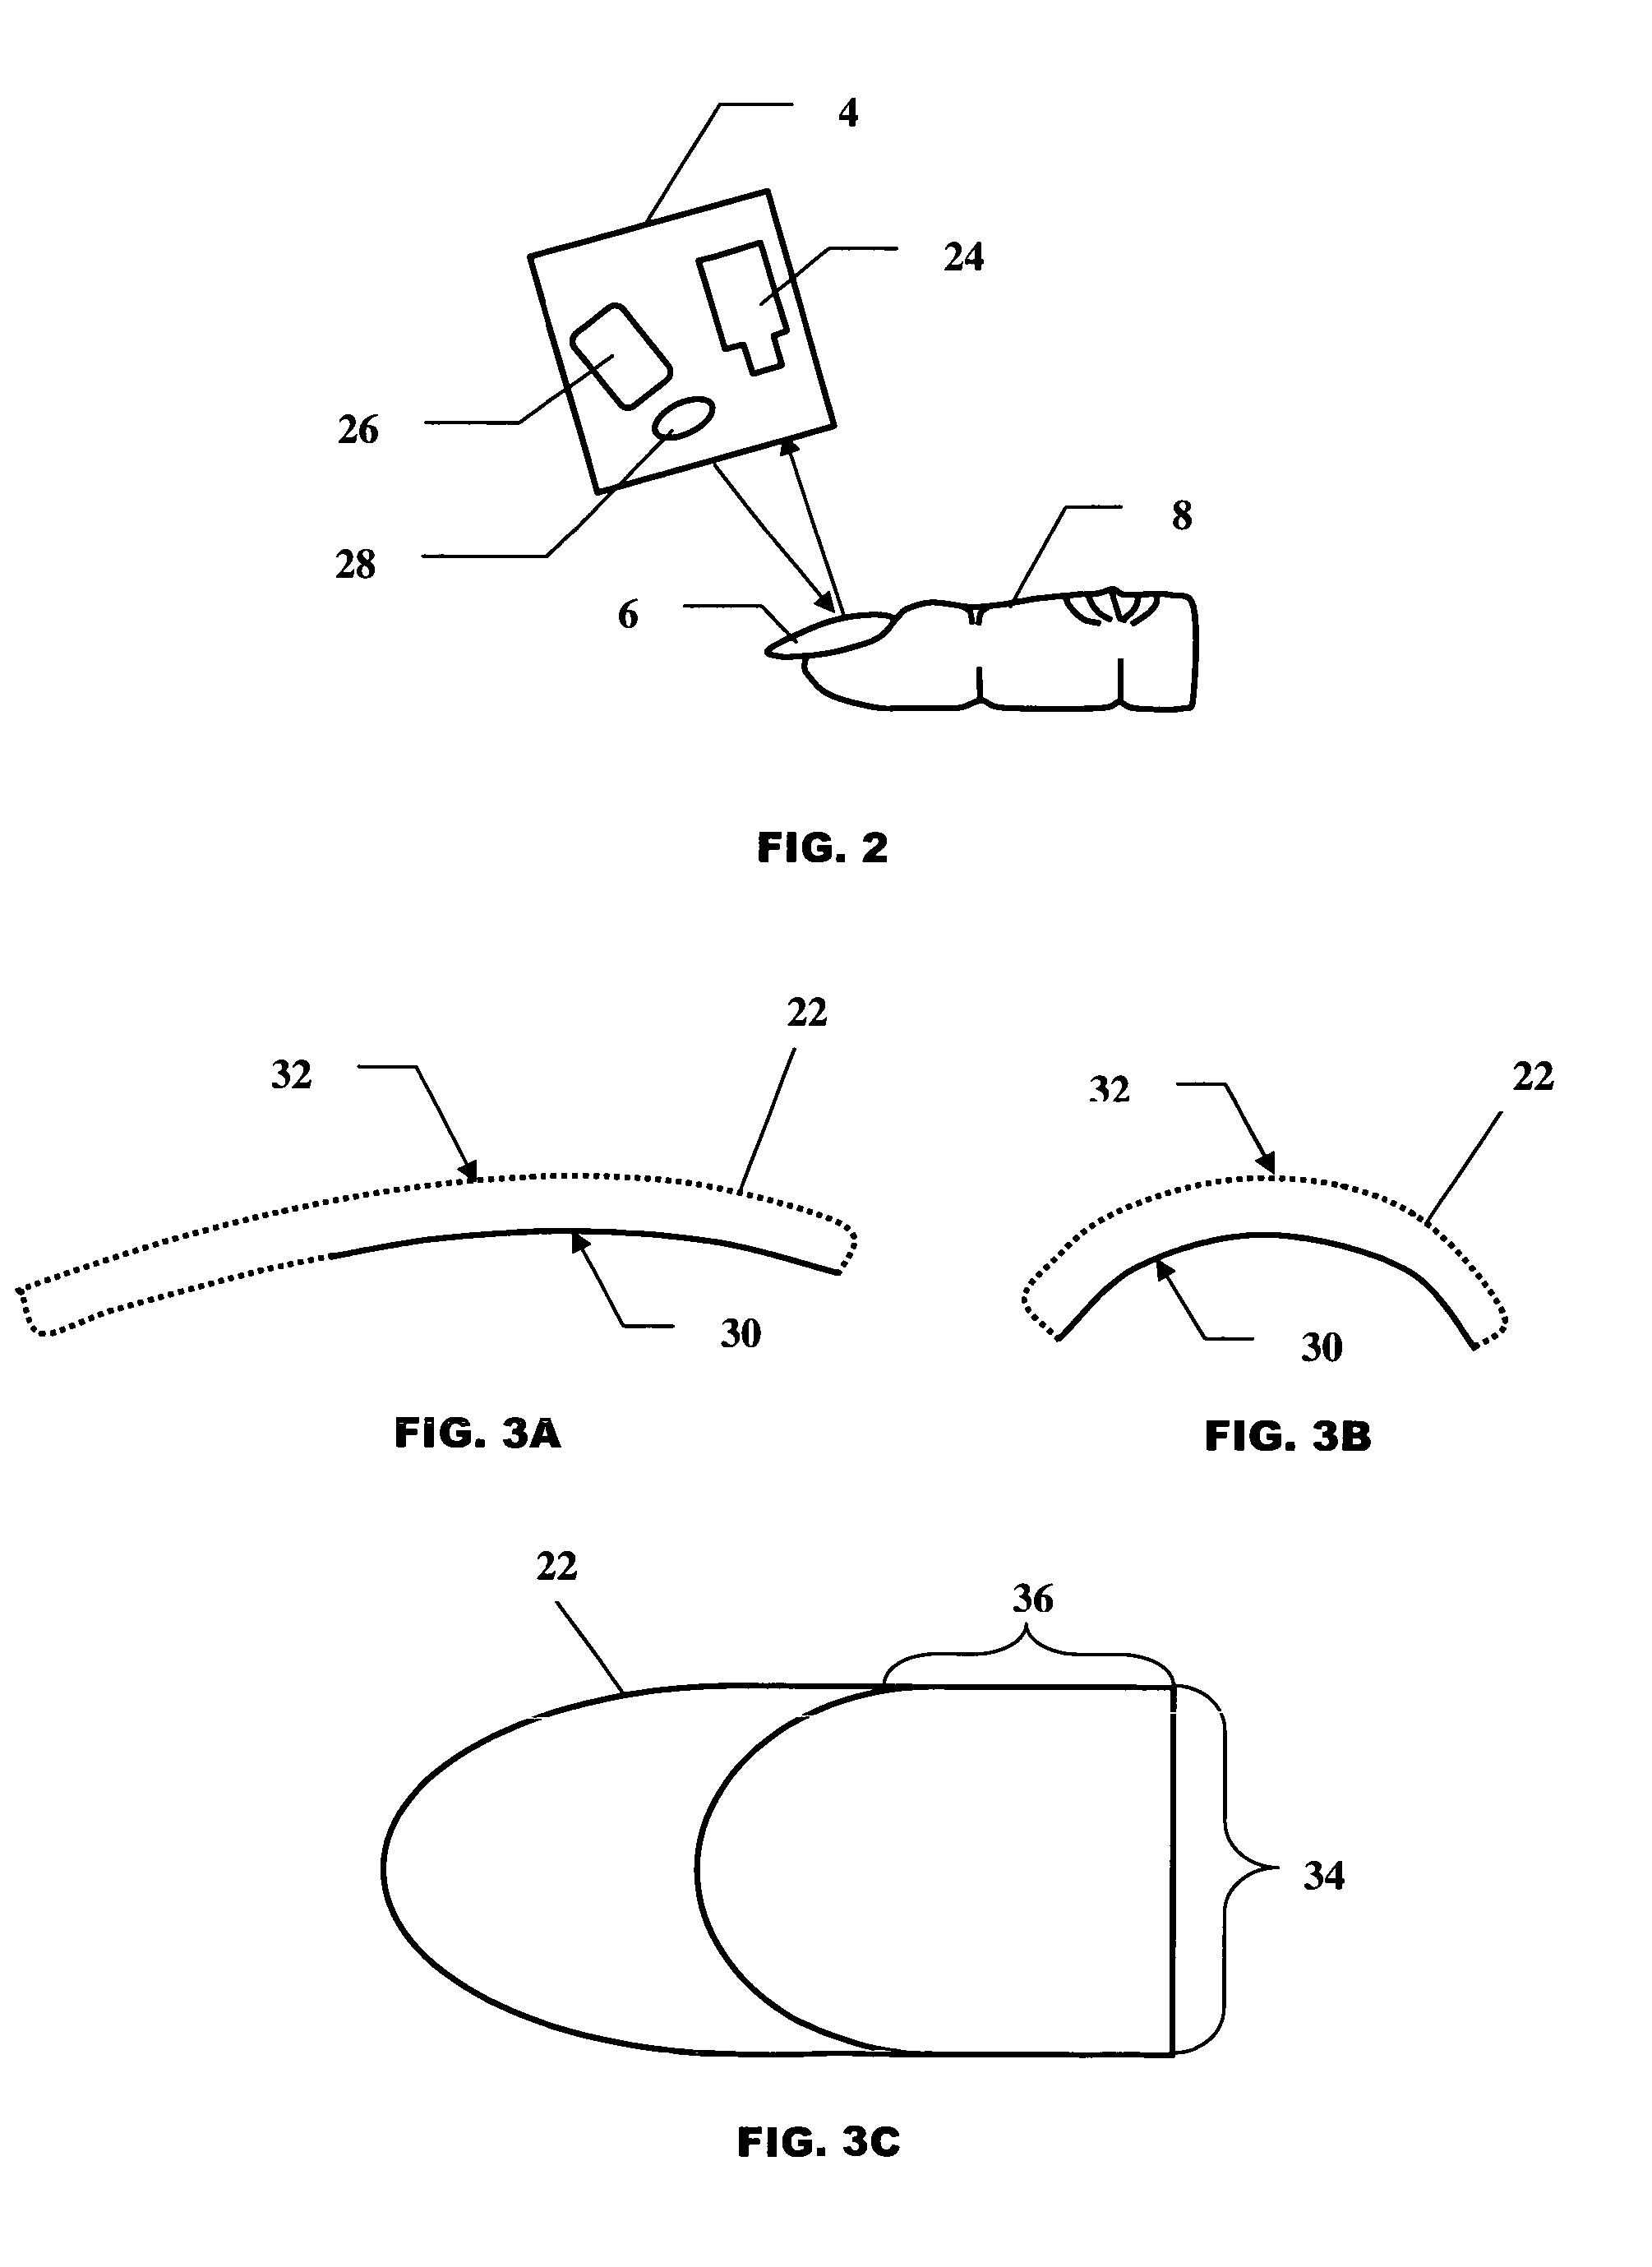 System and process for creating custom fit artificial fingernails using a non-contact optical measuring device